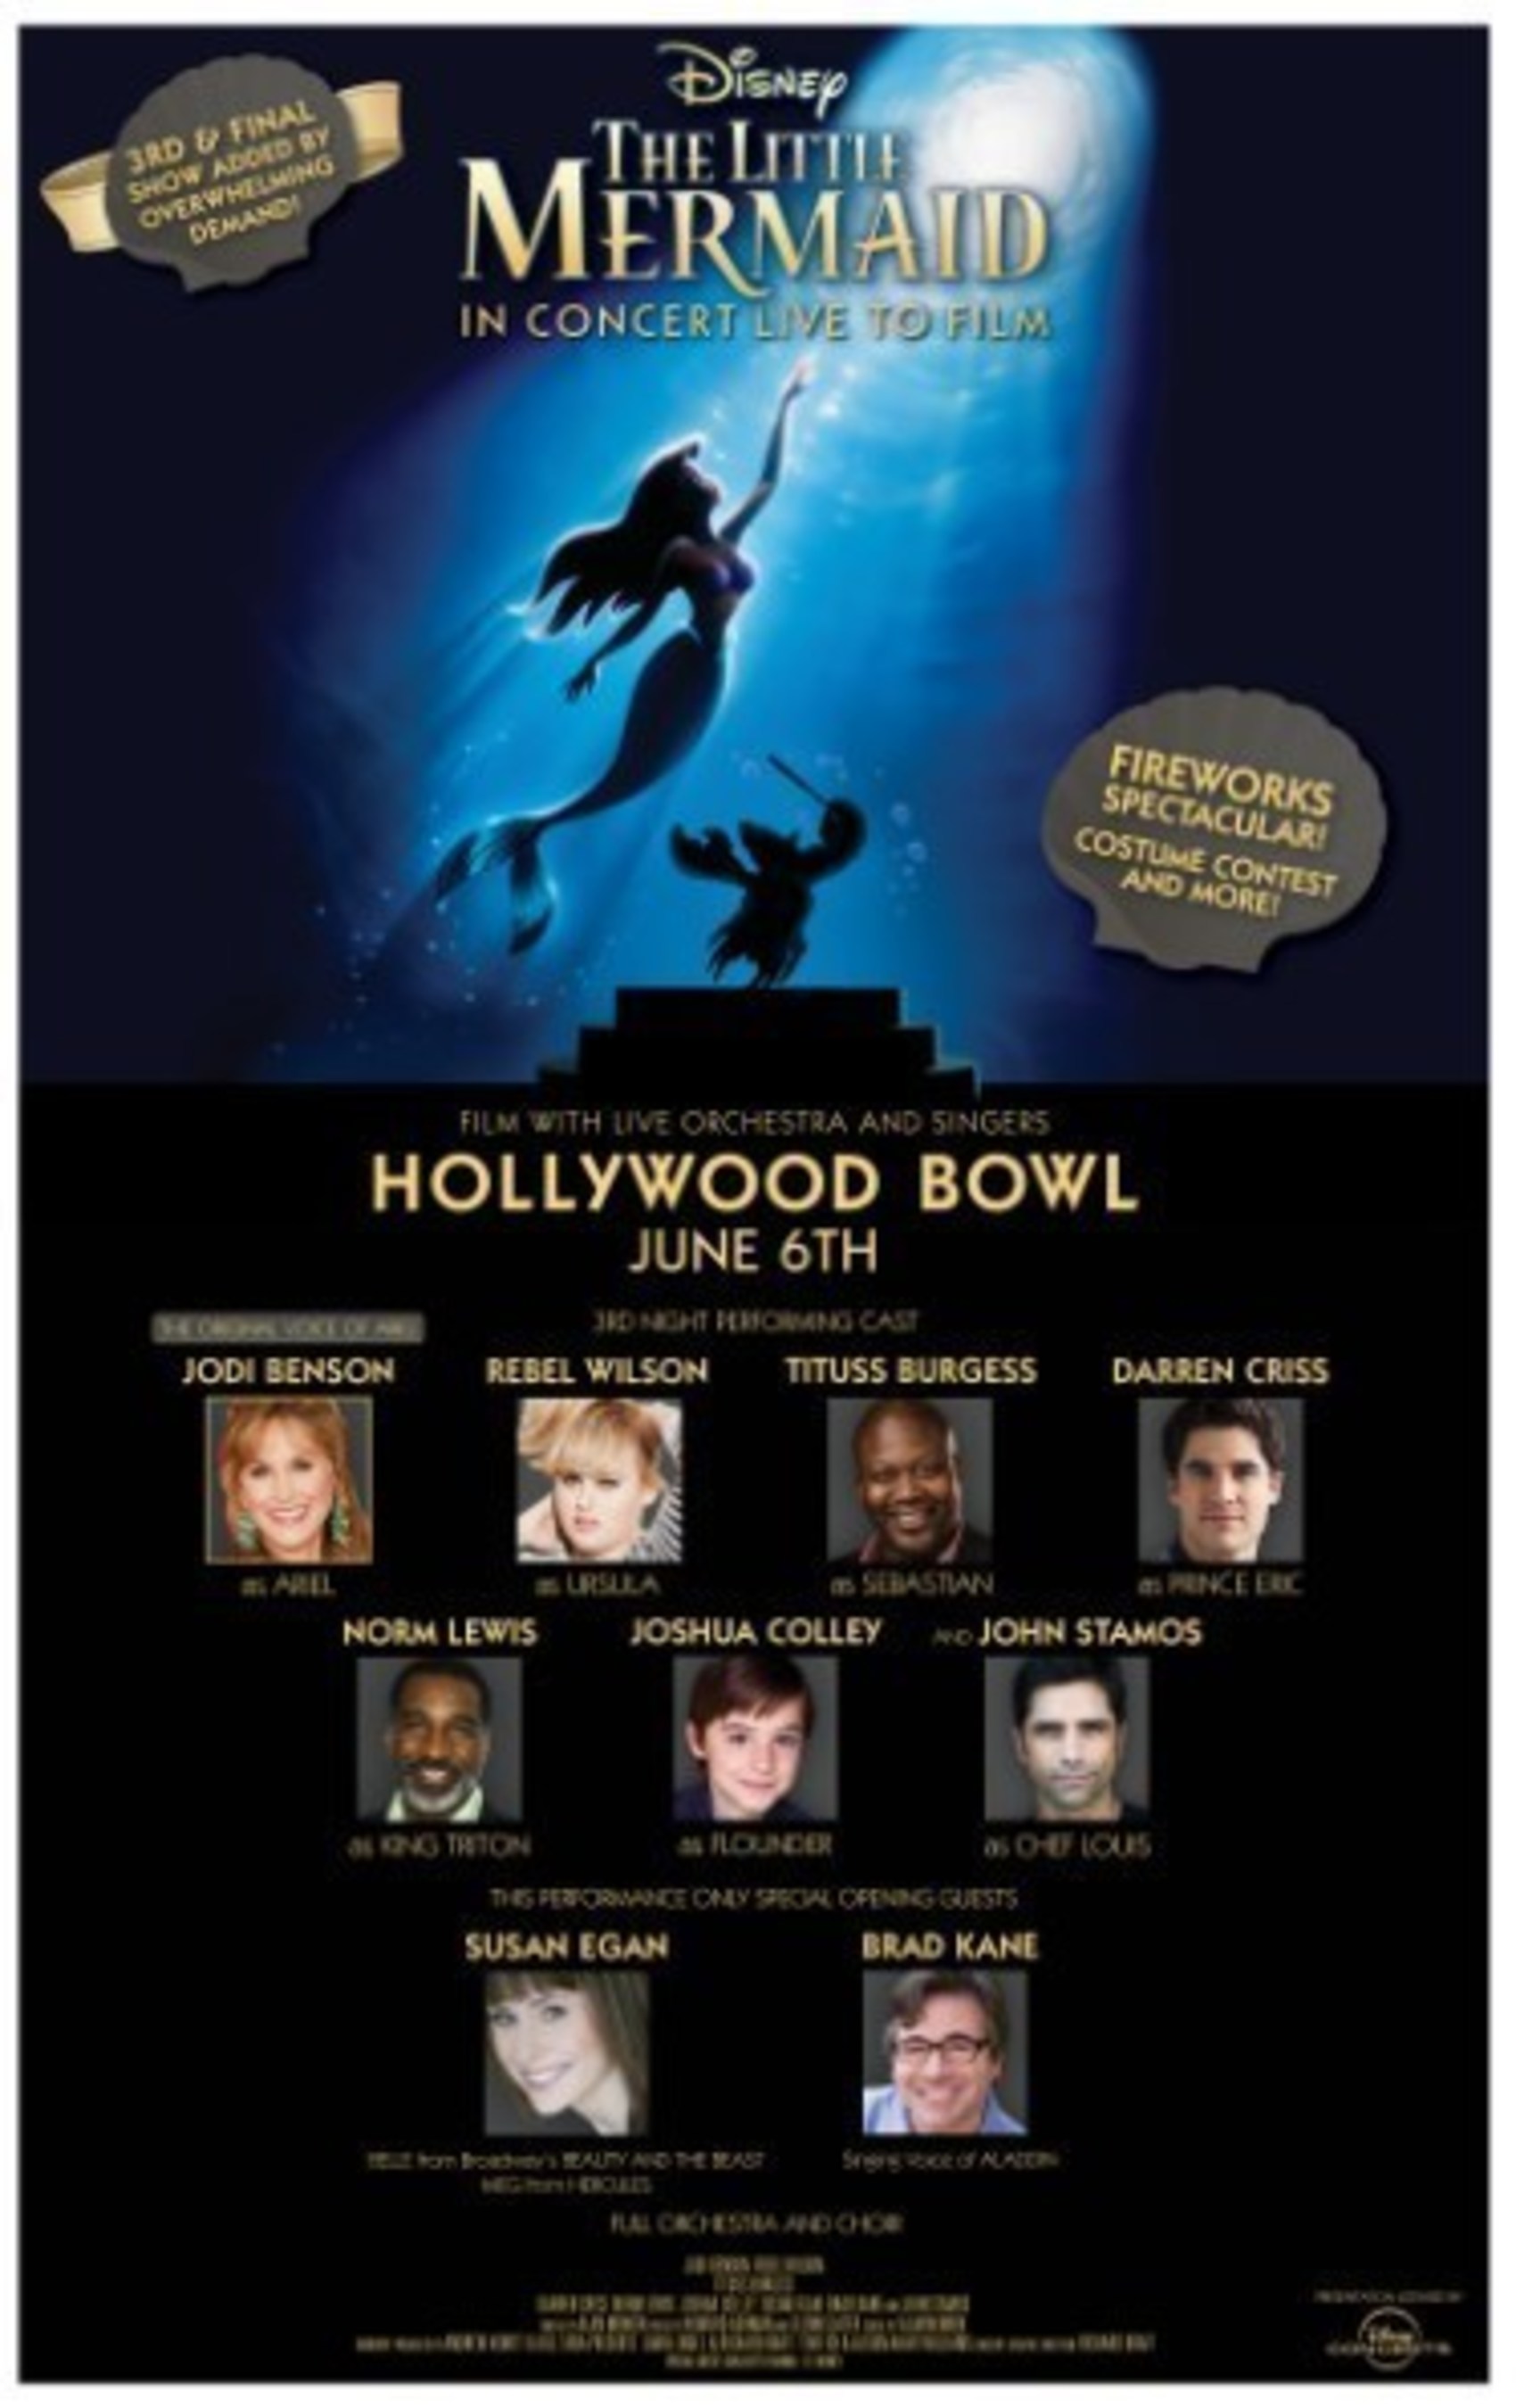 'DISNEY'S THE LITTLE MERMAID LIVE IN CONCERT' PERFORMED WITH ORCHESTRA LIVE TO FILM, MONDAY, JUNE 6